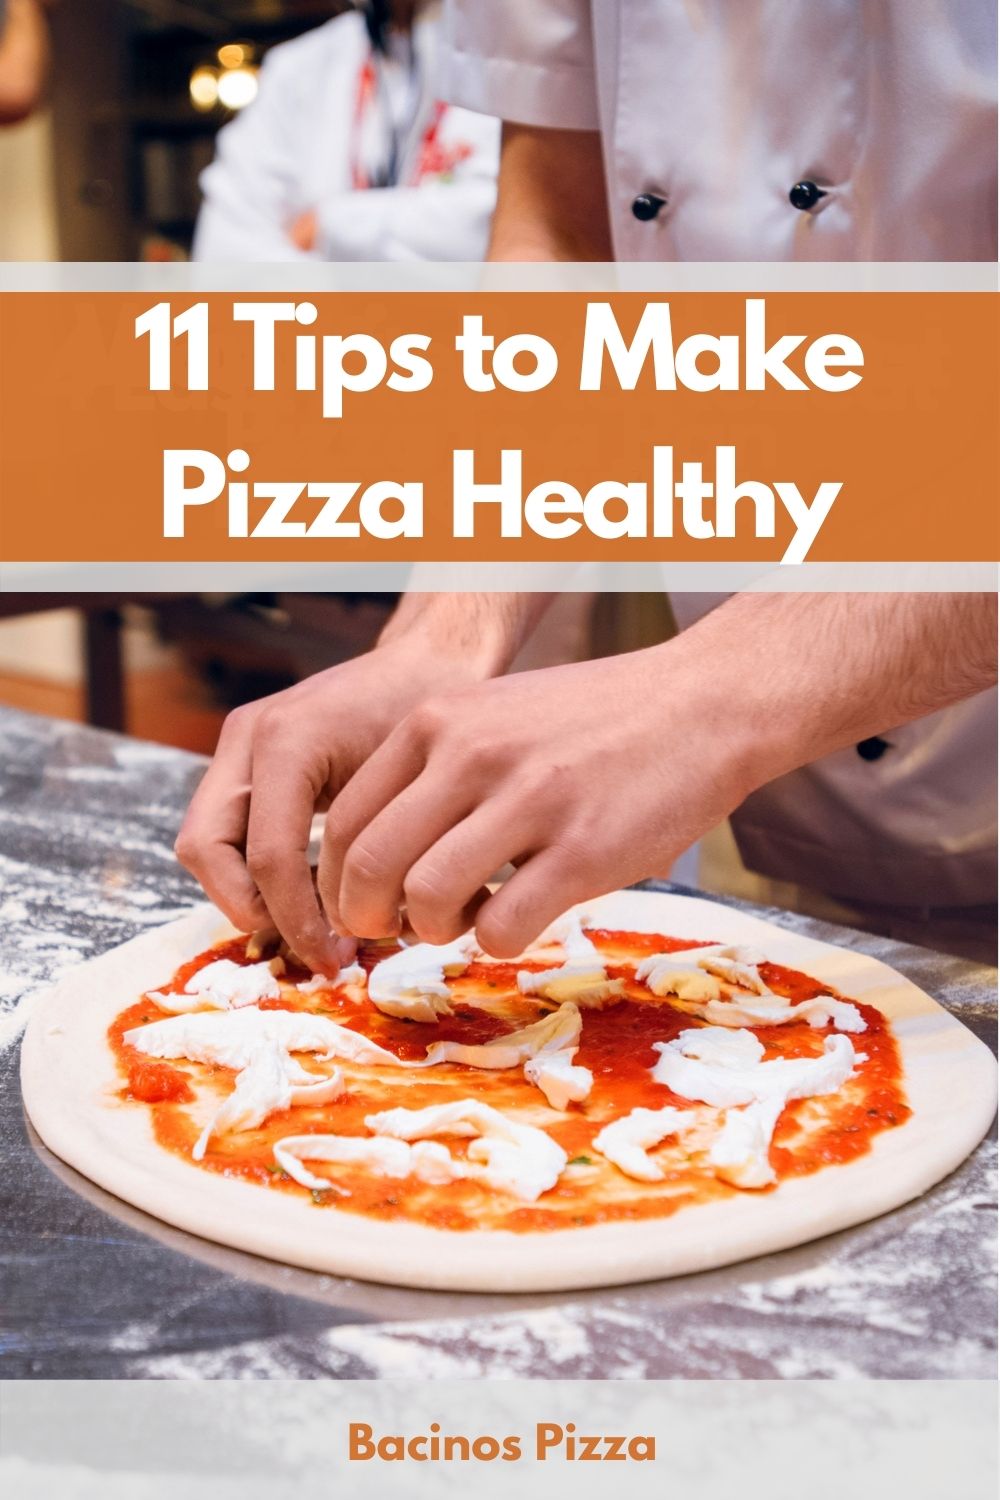 11 Tips to Make Pizza Healthy pin 2